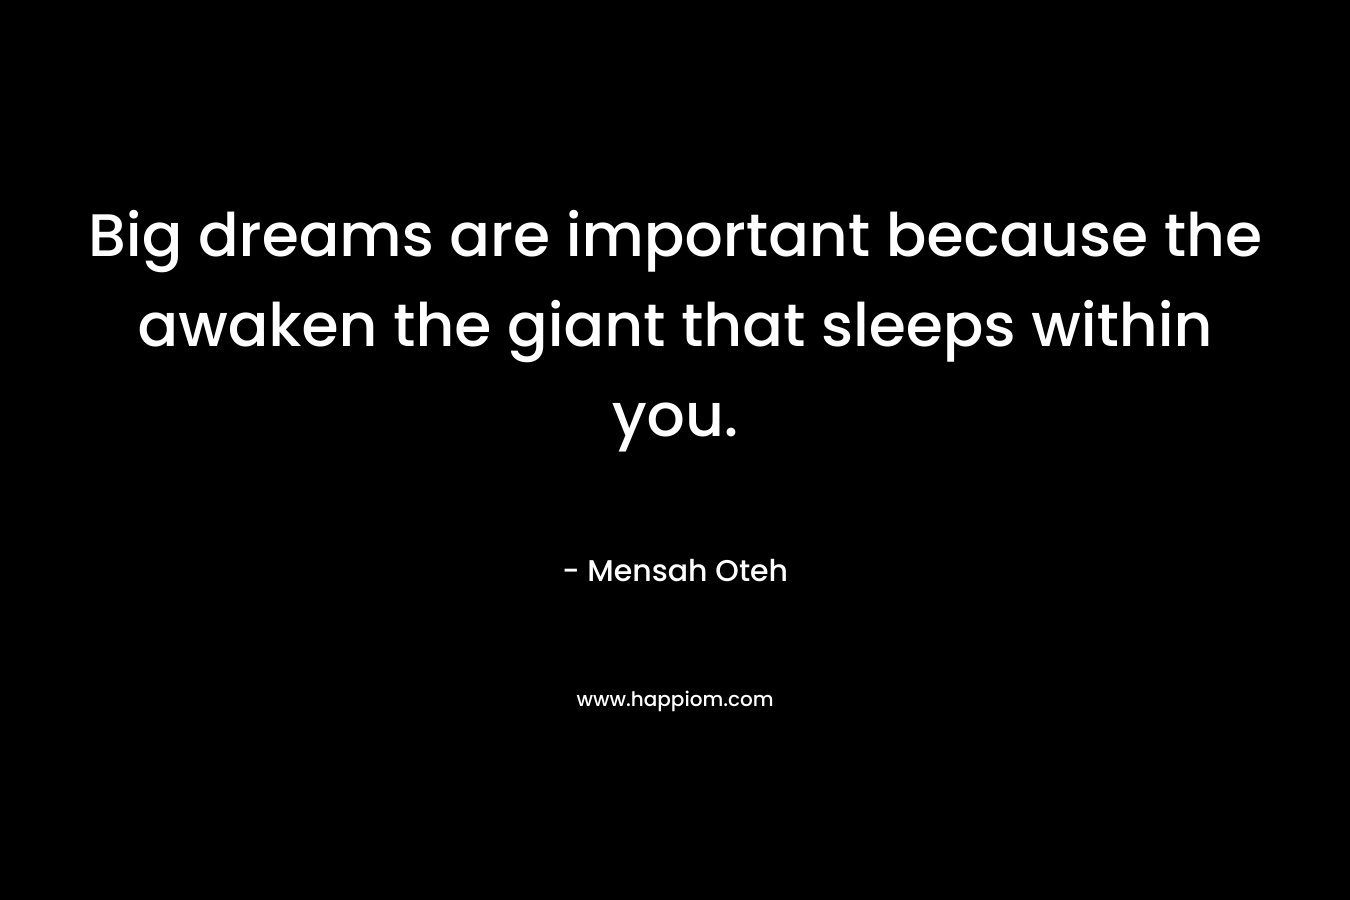 Big dreams are important because the awaken the giant that sleeps within you.